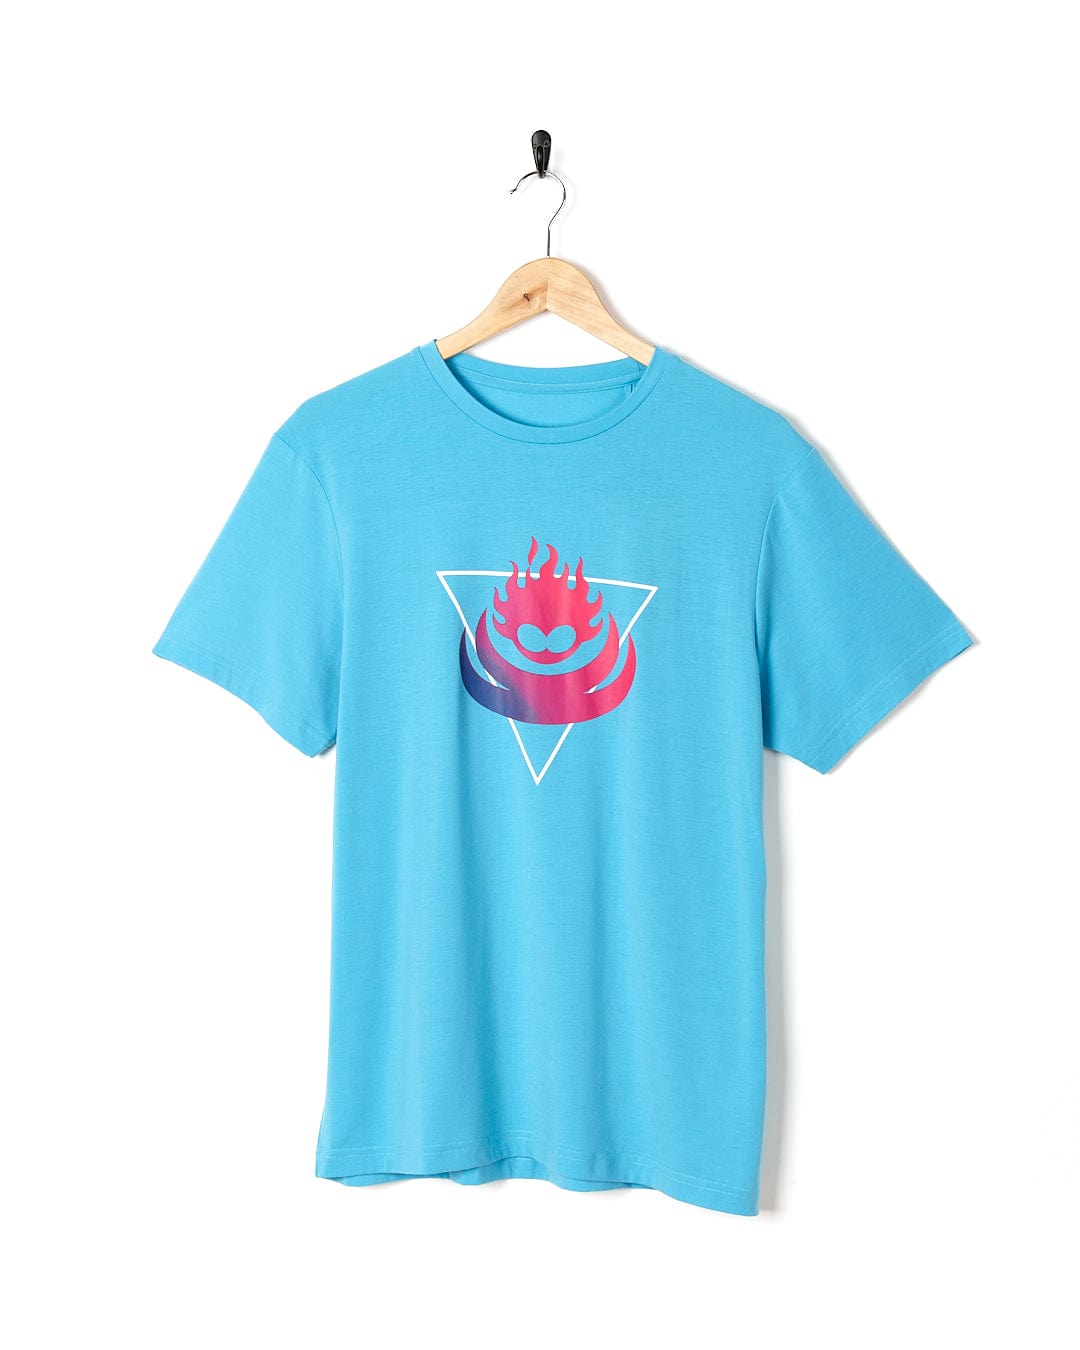 A Saltrock Flame Tri - Mens Recycled Short Sleeve T-Shirt - Teal with a pink and blue triangle on it.